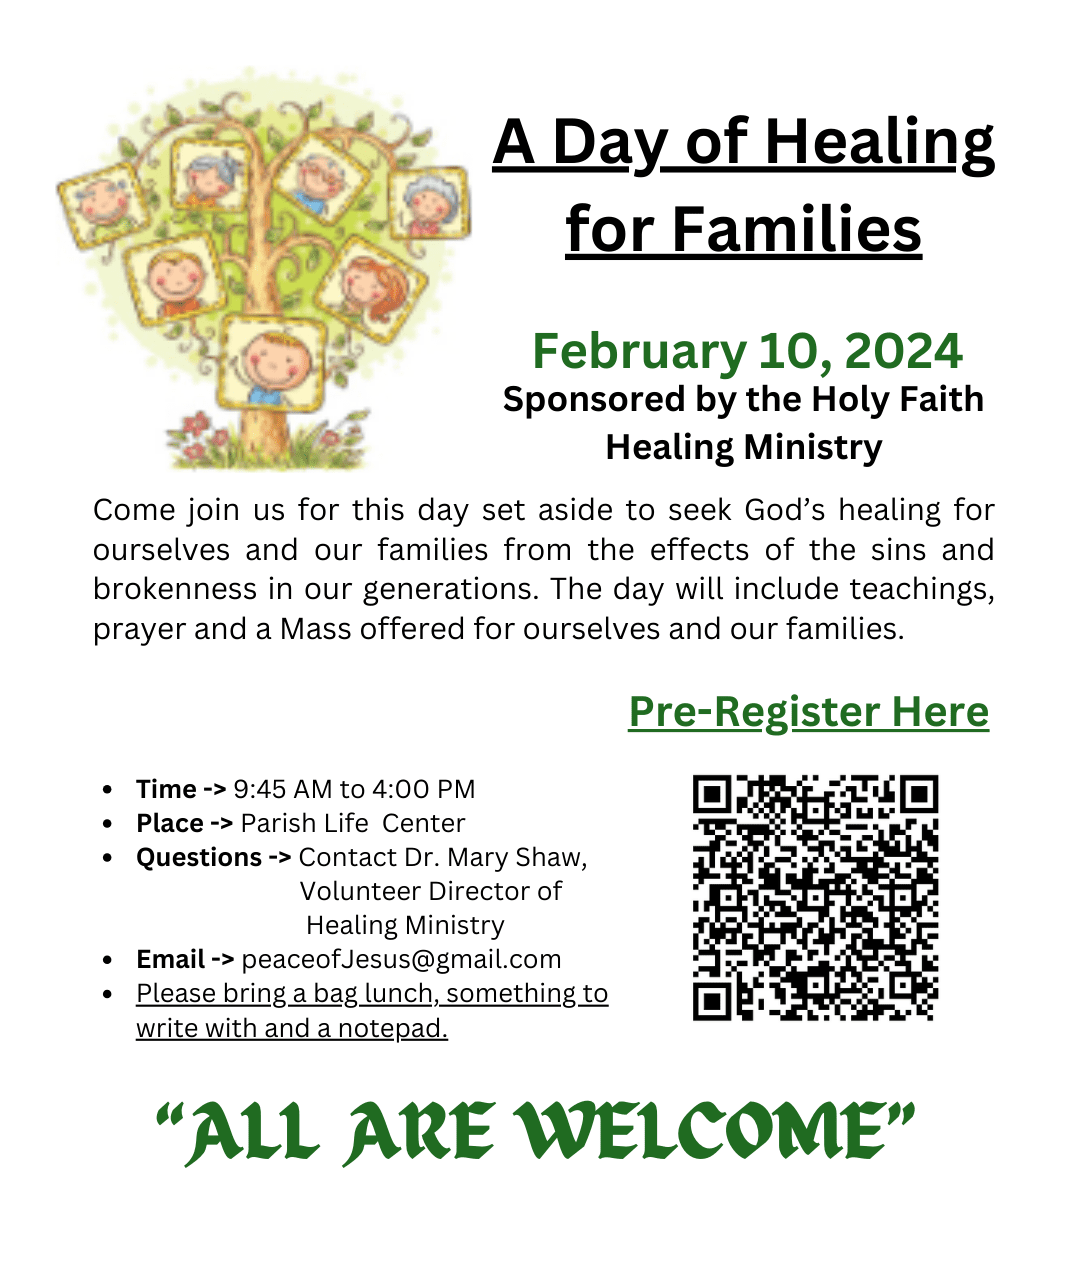 Day-of-Healing-for-Families image